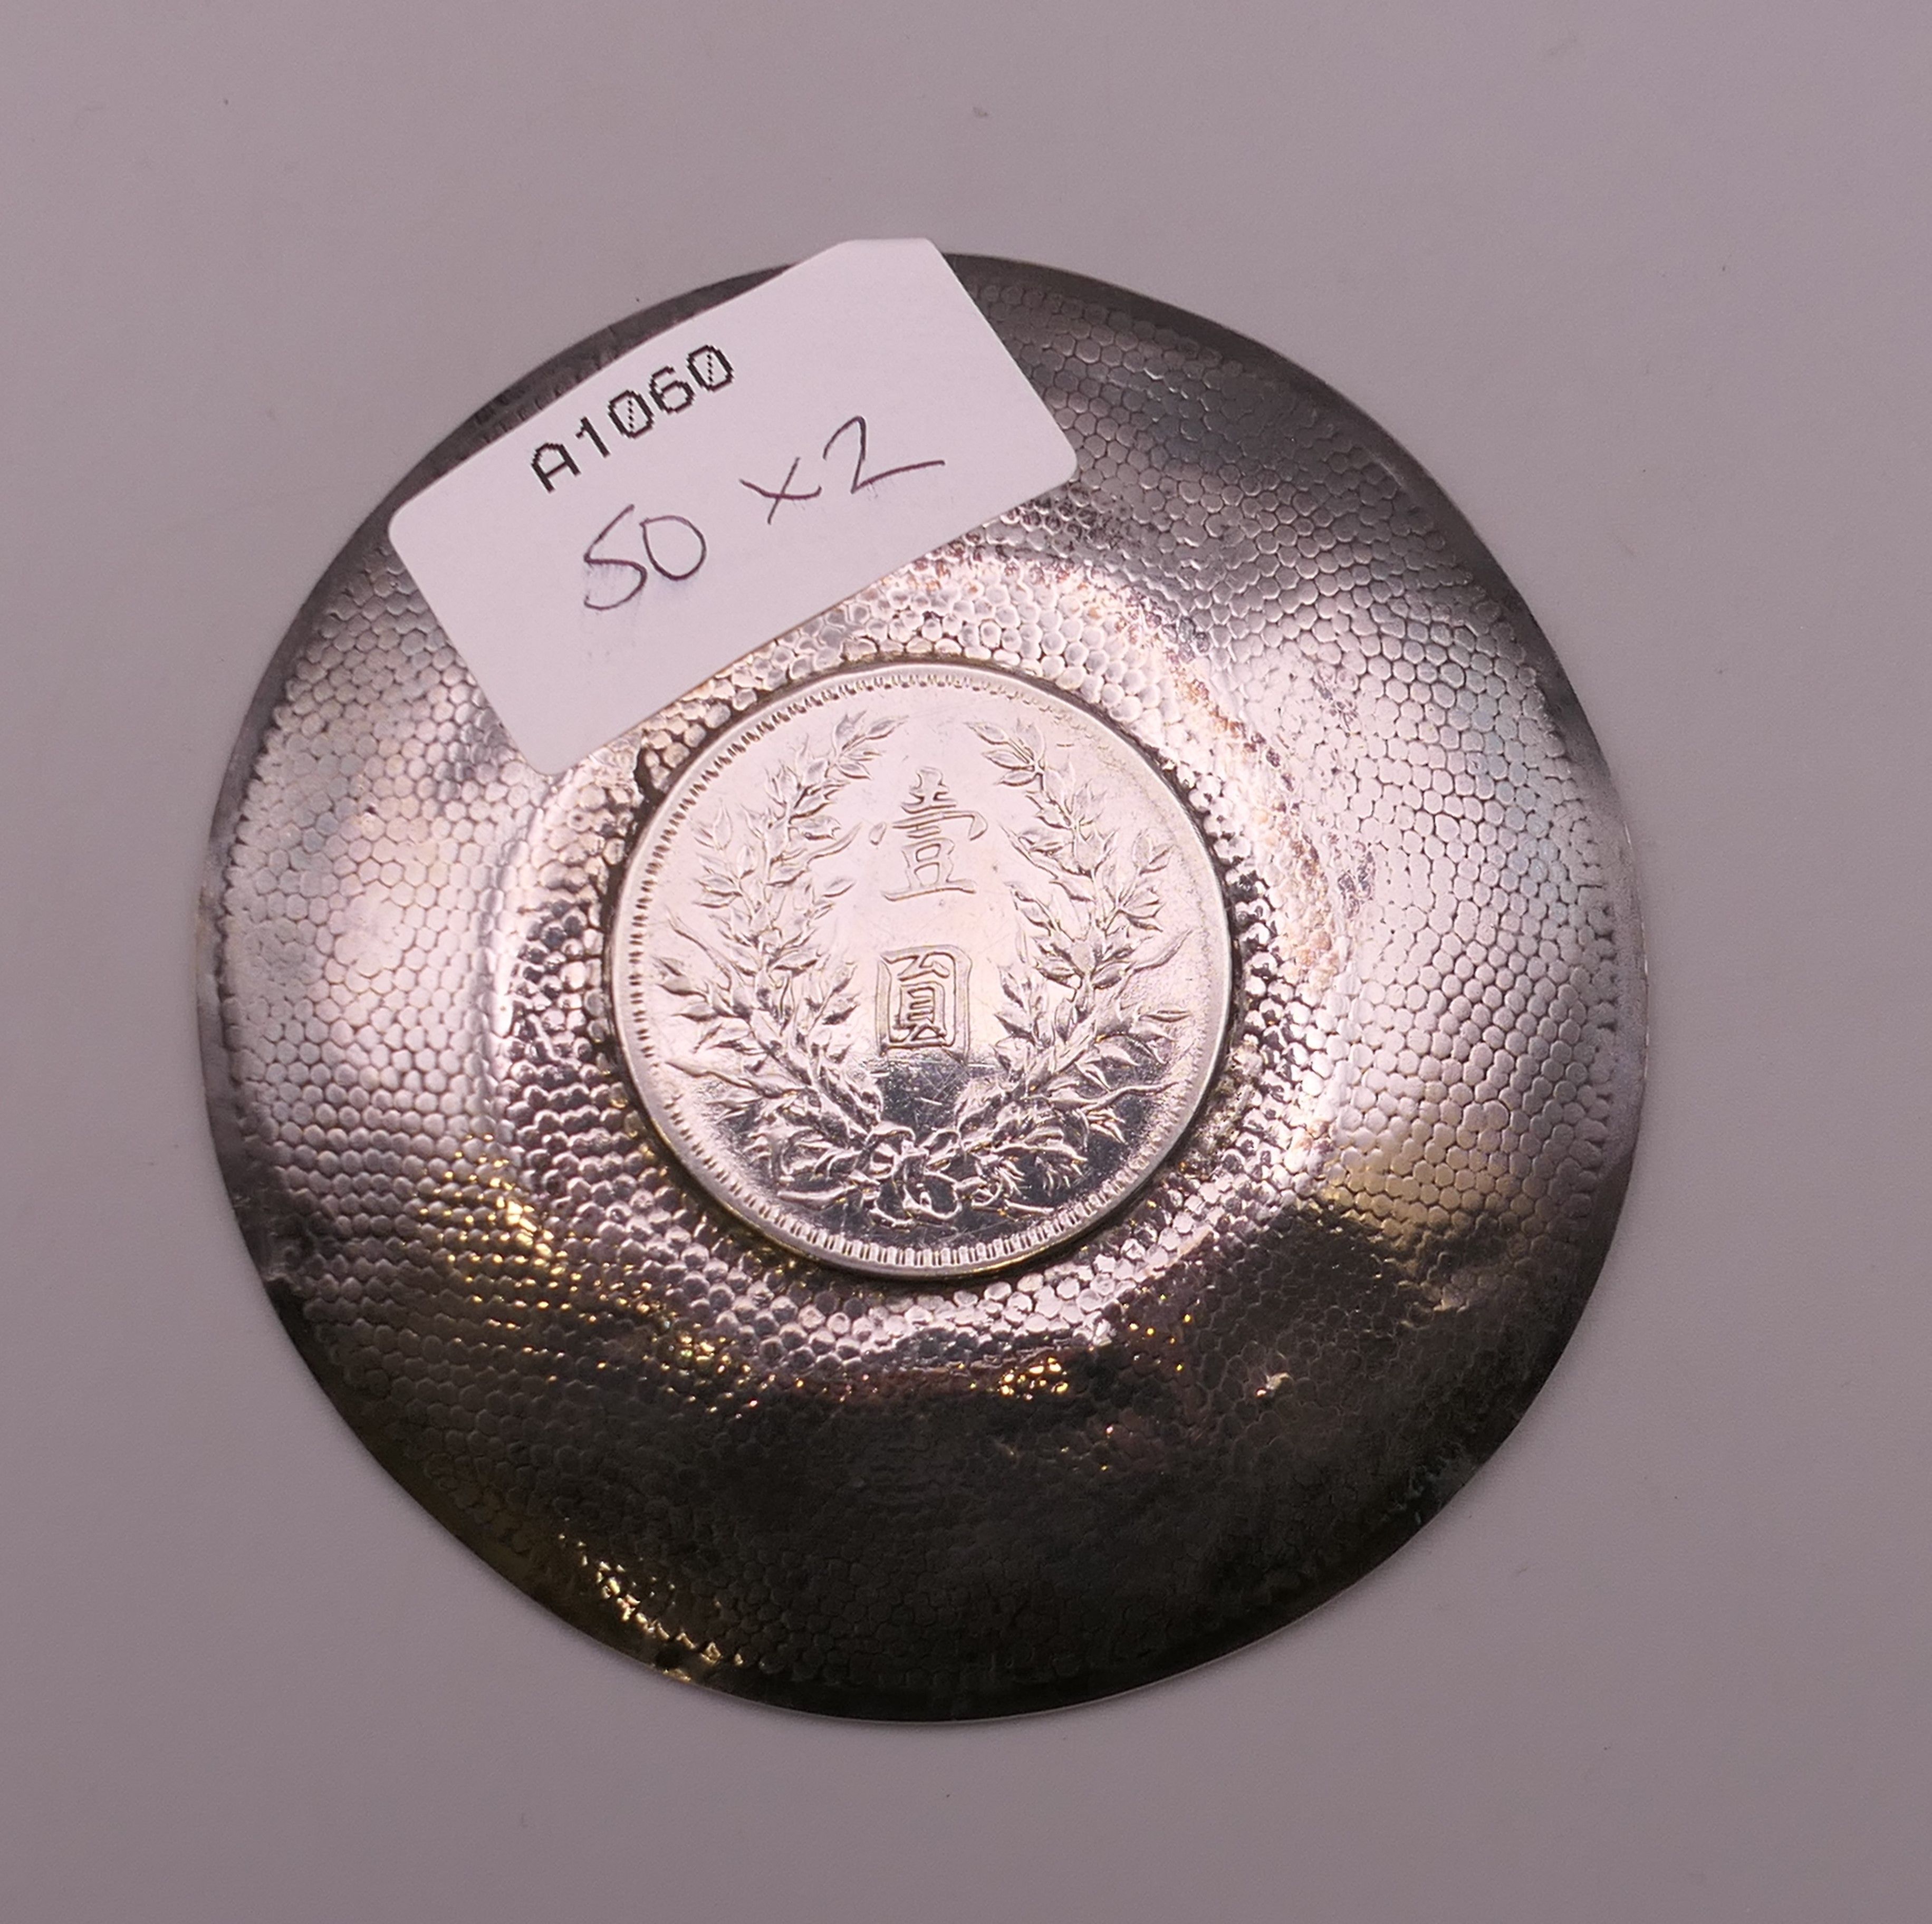 Two Chinese silver dishes inset with coins. 9.5 cm diameter. 117.9 grammes total weight. - Image 5 of 5